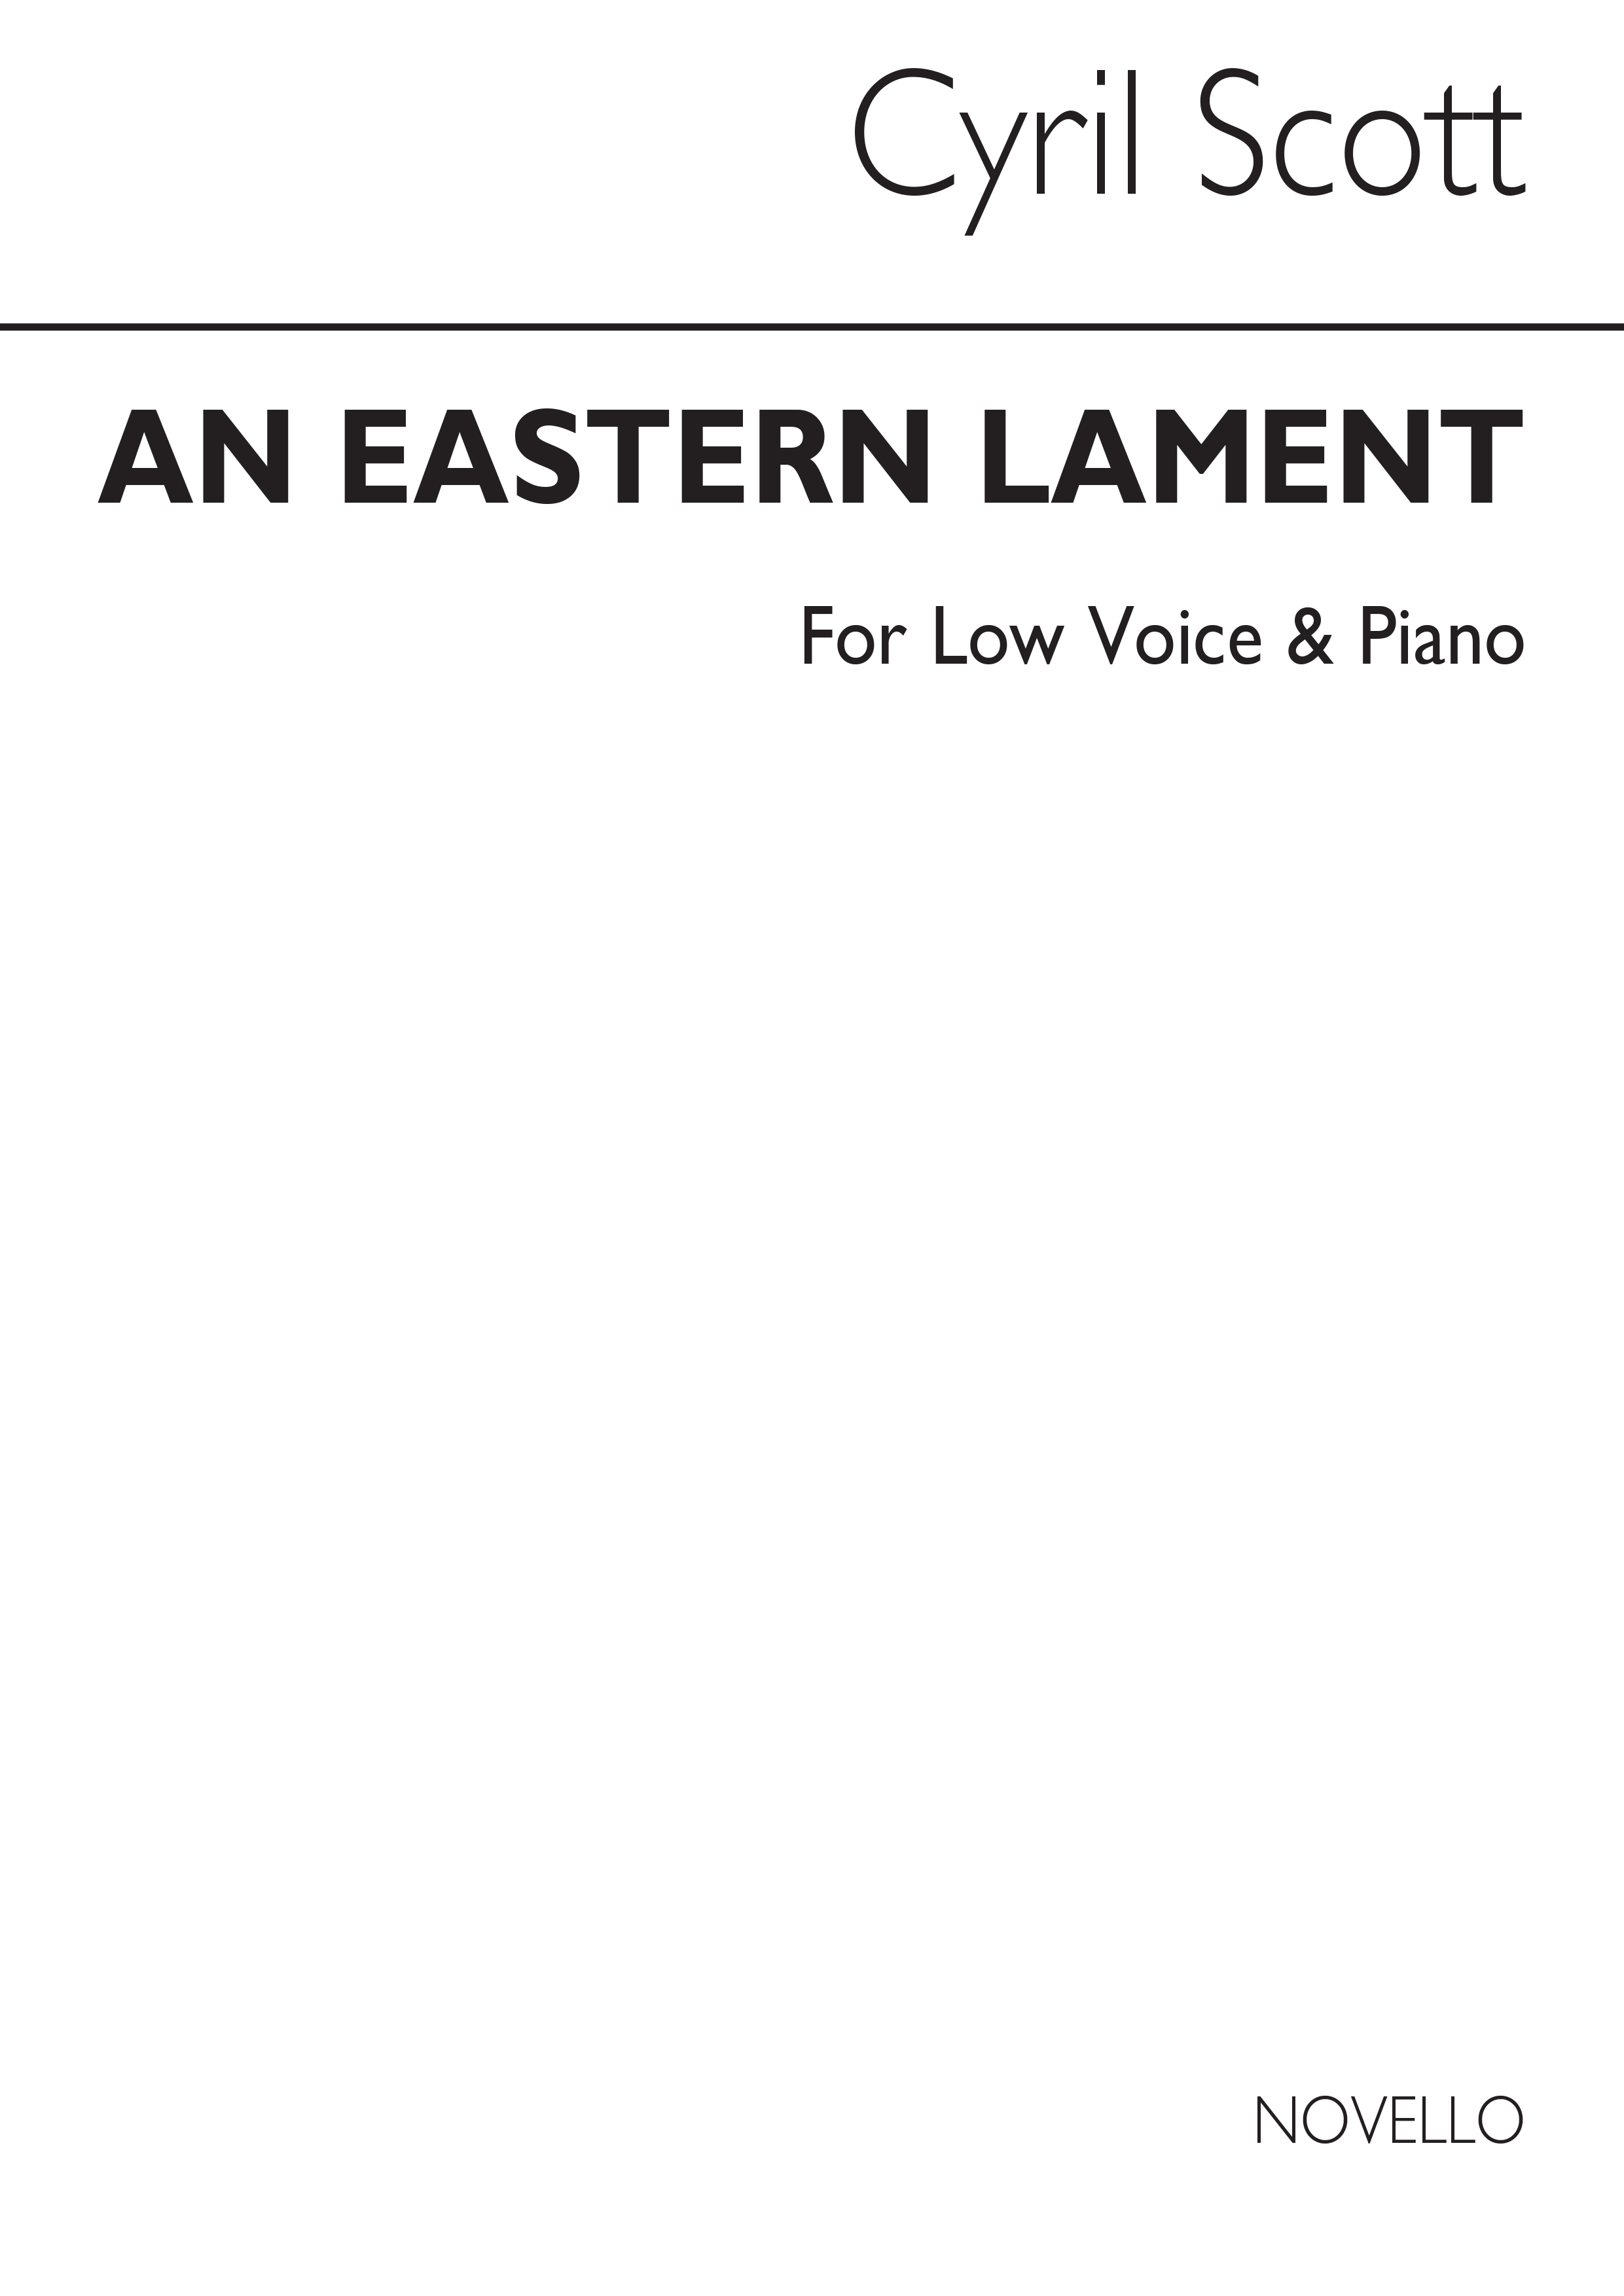 Cyril Scott: An Eastern Lament Op62 No.3-low Voice/Piano (Key-c Minor)